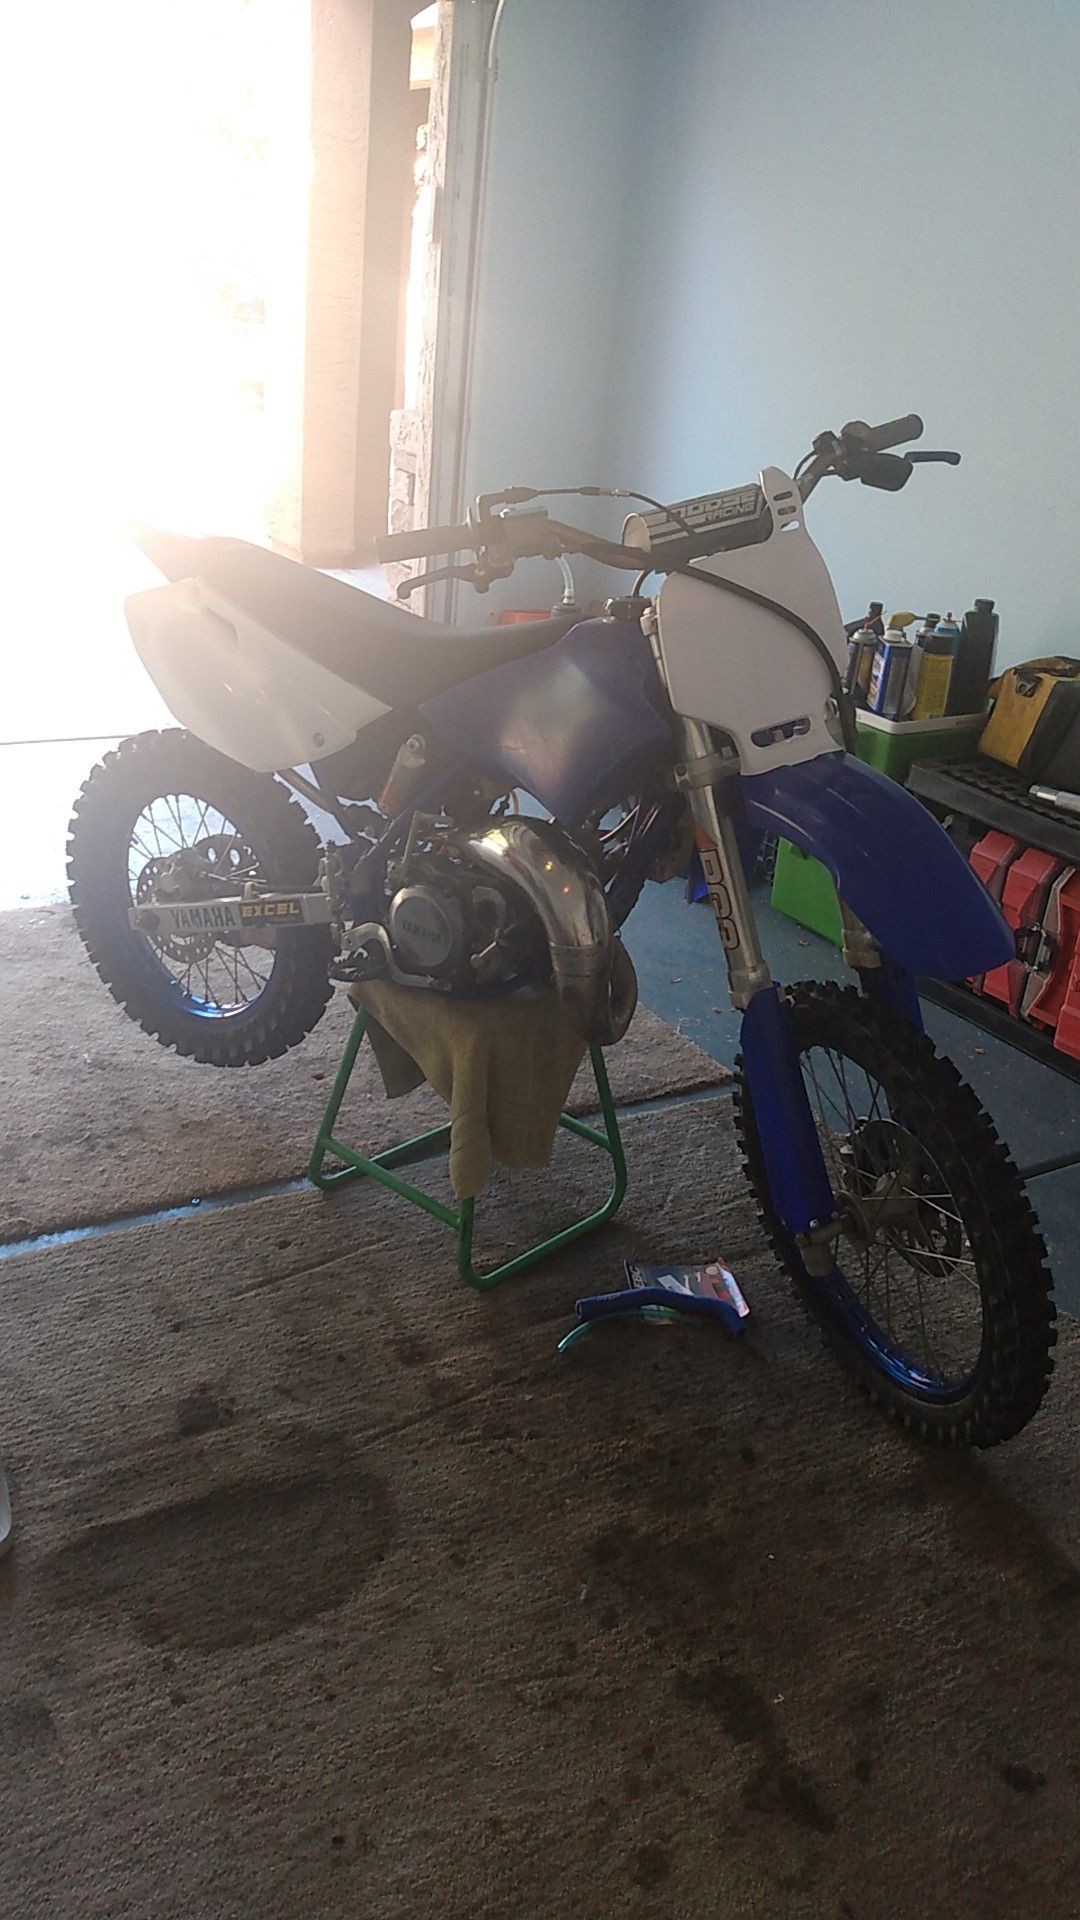 Yz 85 2008 big wheel board to 110 and a coolster pit bike